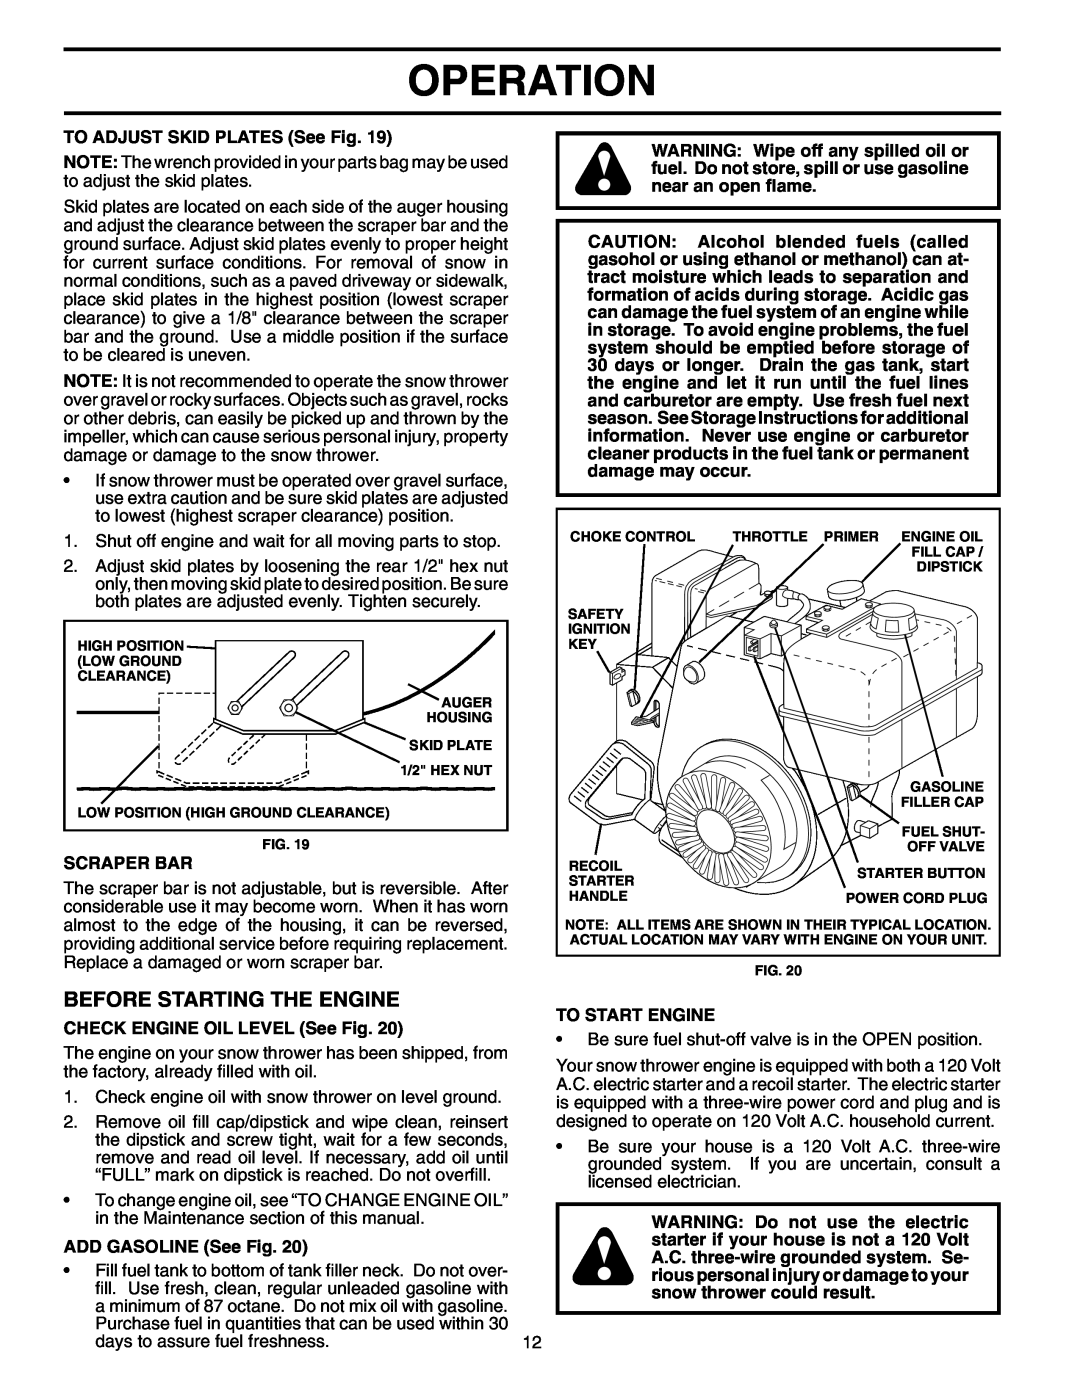 Poulan 96192001200 Before Starting The Engine, Operation, TO ADJUST SKID PLATES See Fig, Scraper Bar, ADD GASOLINE See Fig 